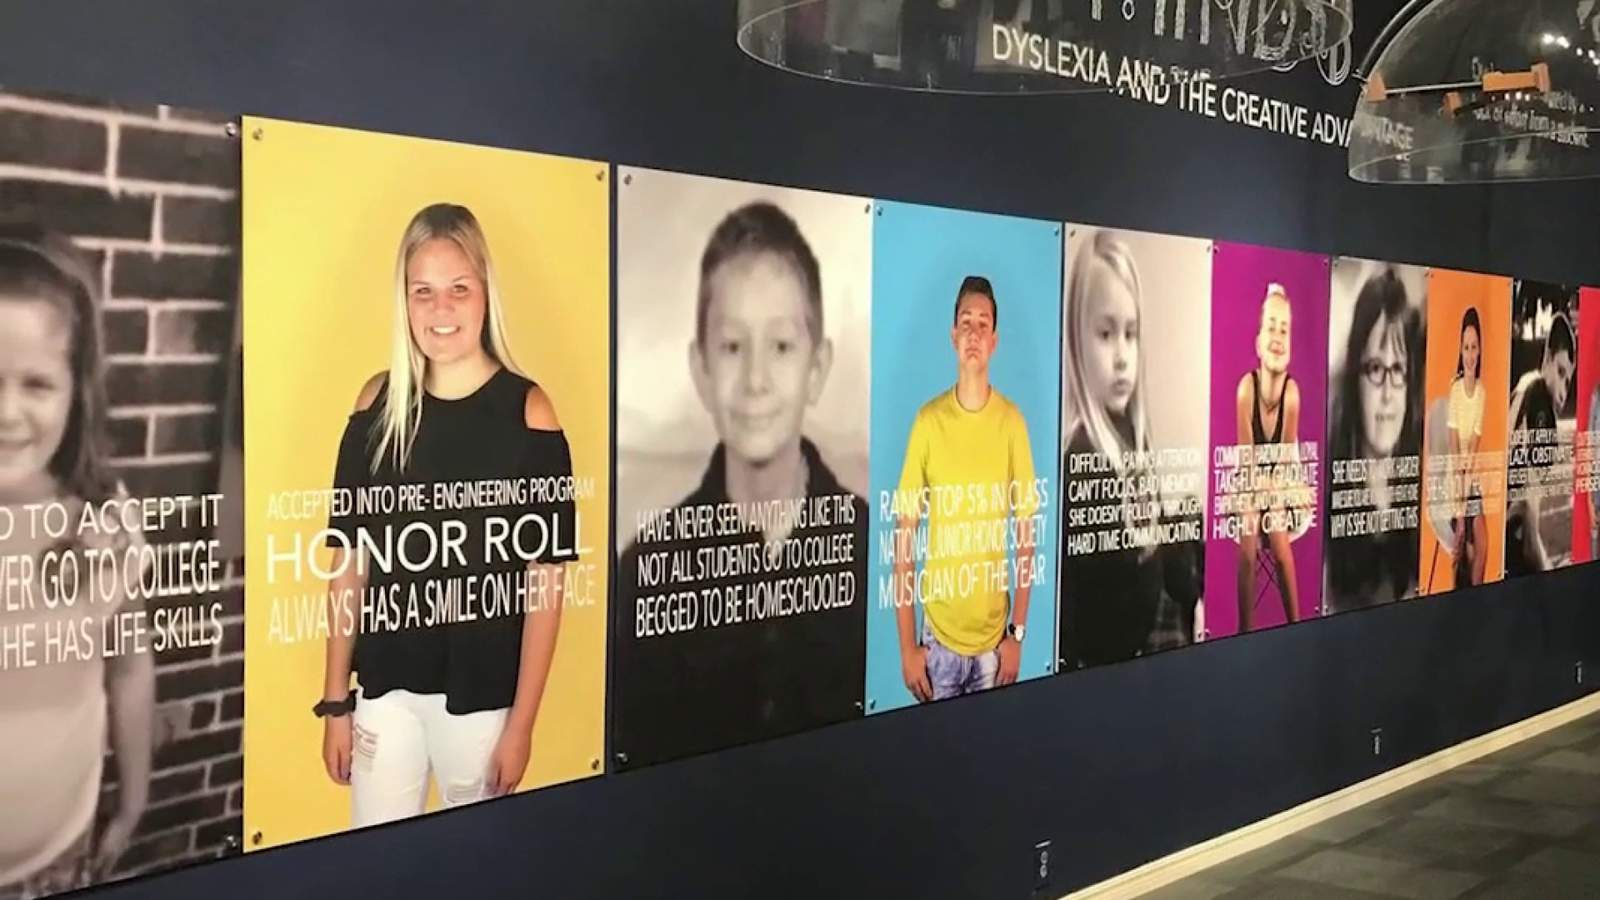 New exhibit at The DoSeum aims to raise awareness about dyslexia